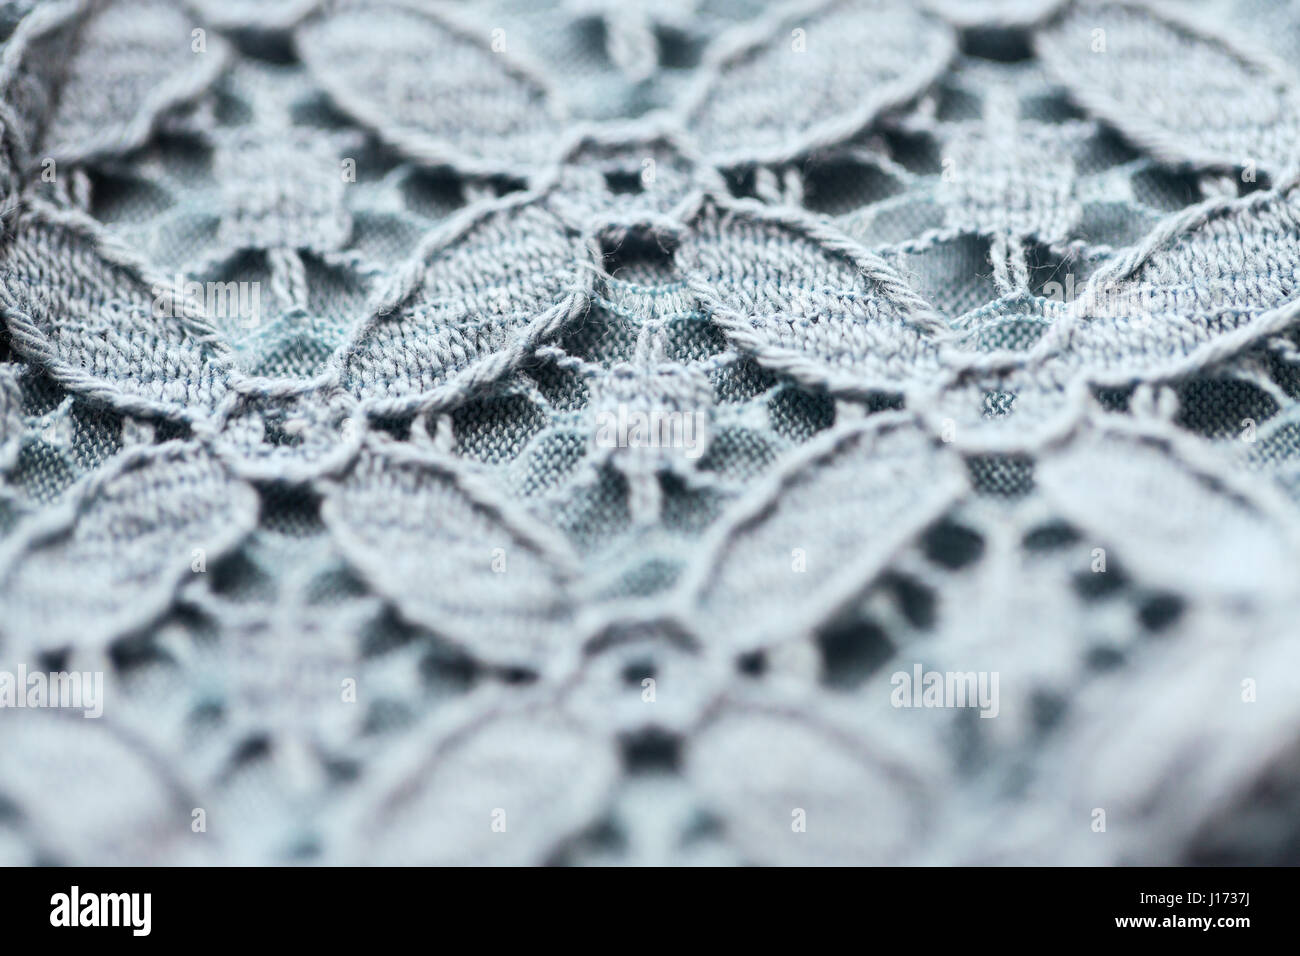 close up of lace textile or fabric background Stock Photo